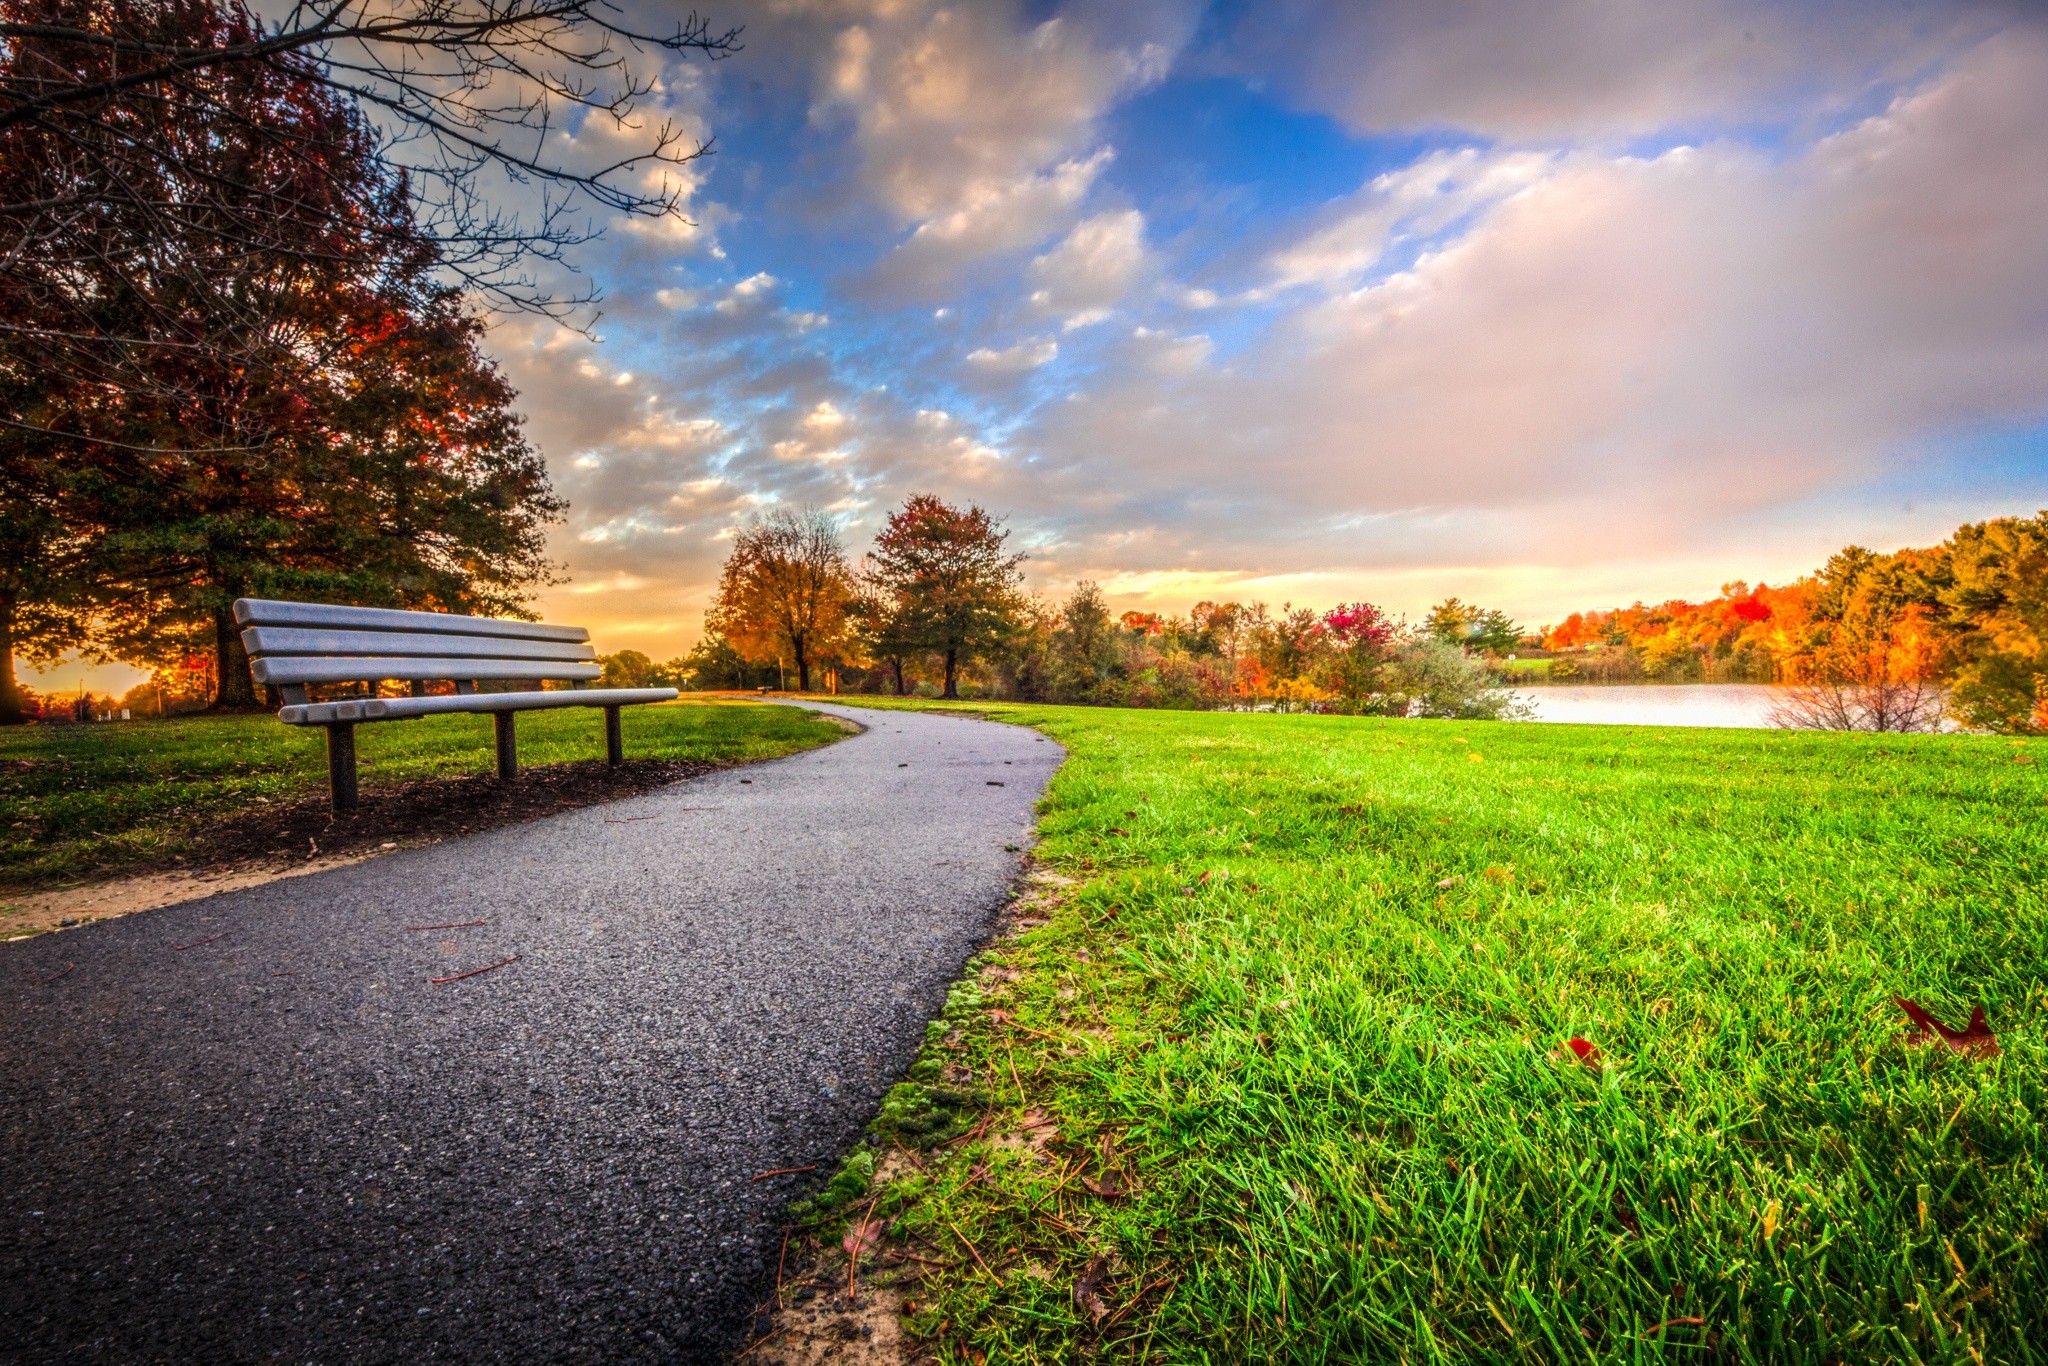 General 2048x1366 sunset path bench park trees clouds grass fall nature landscape green HDR